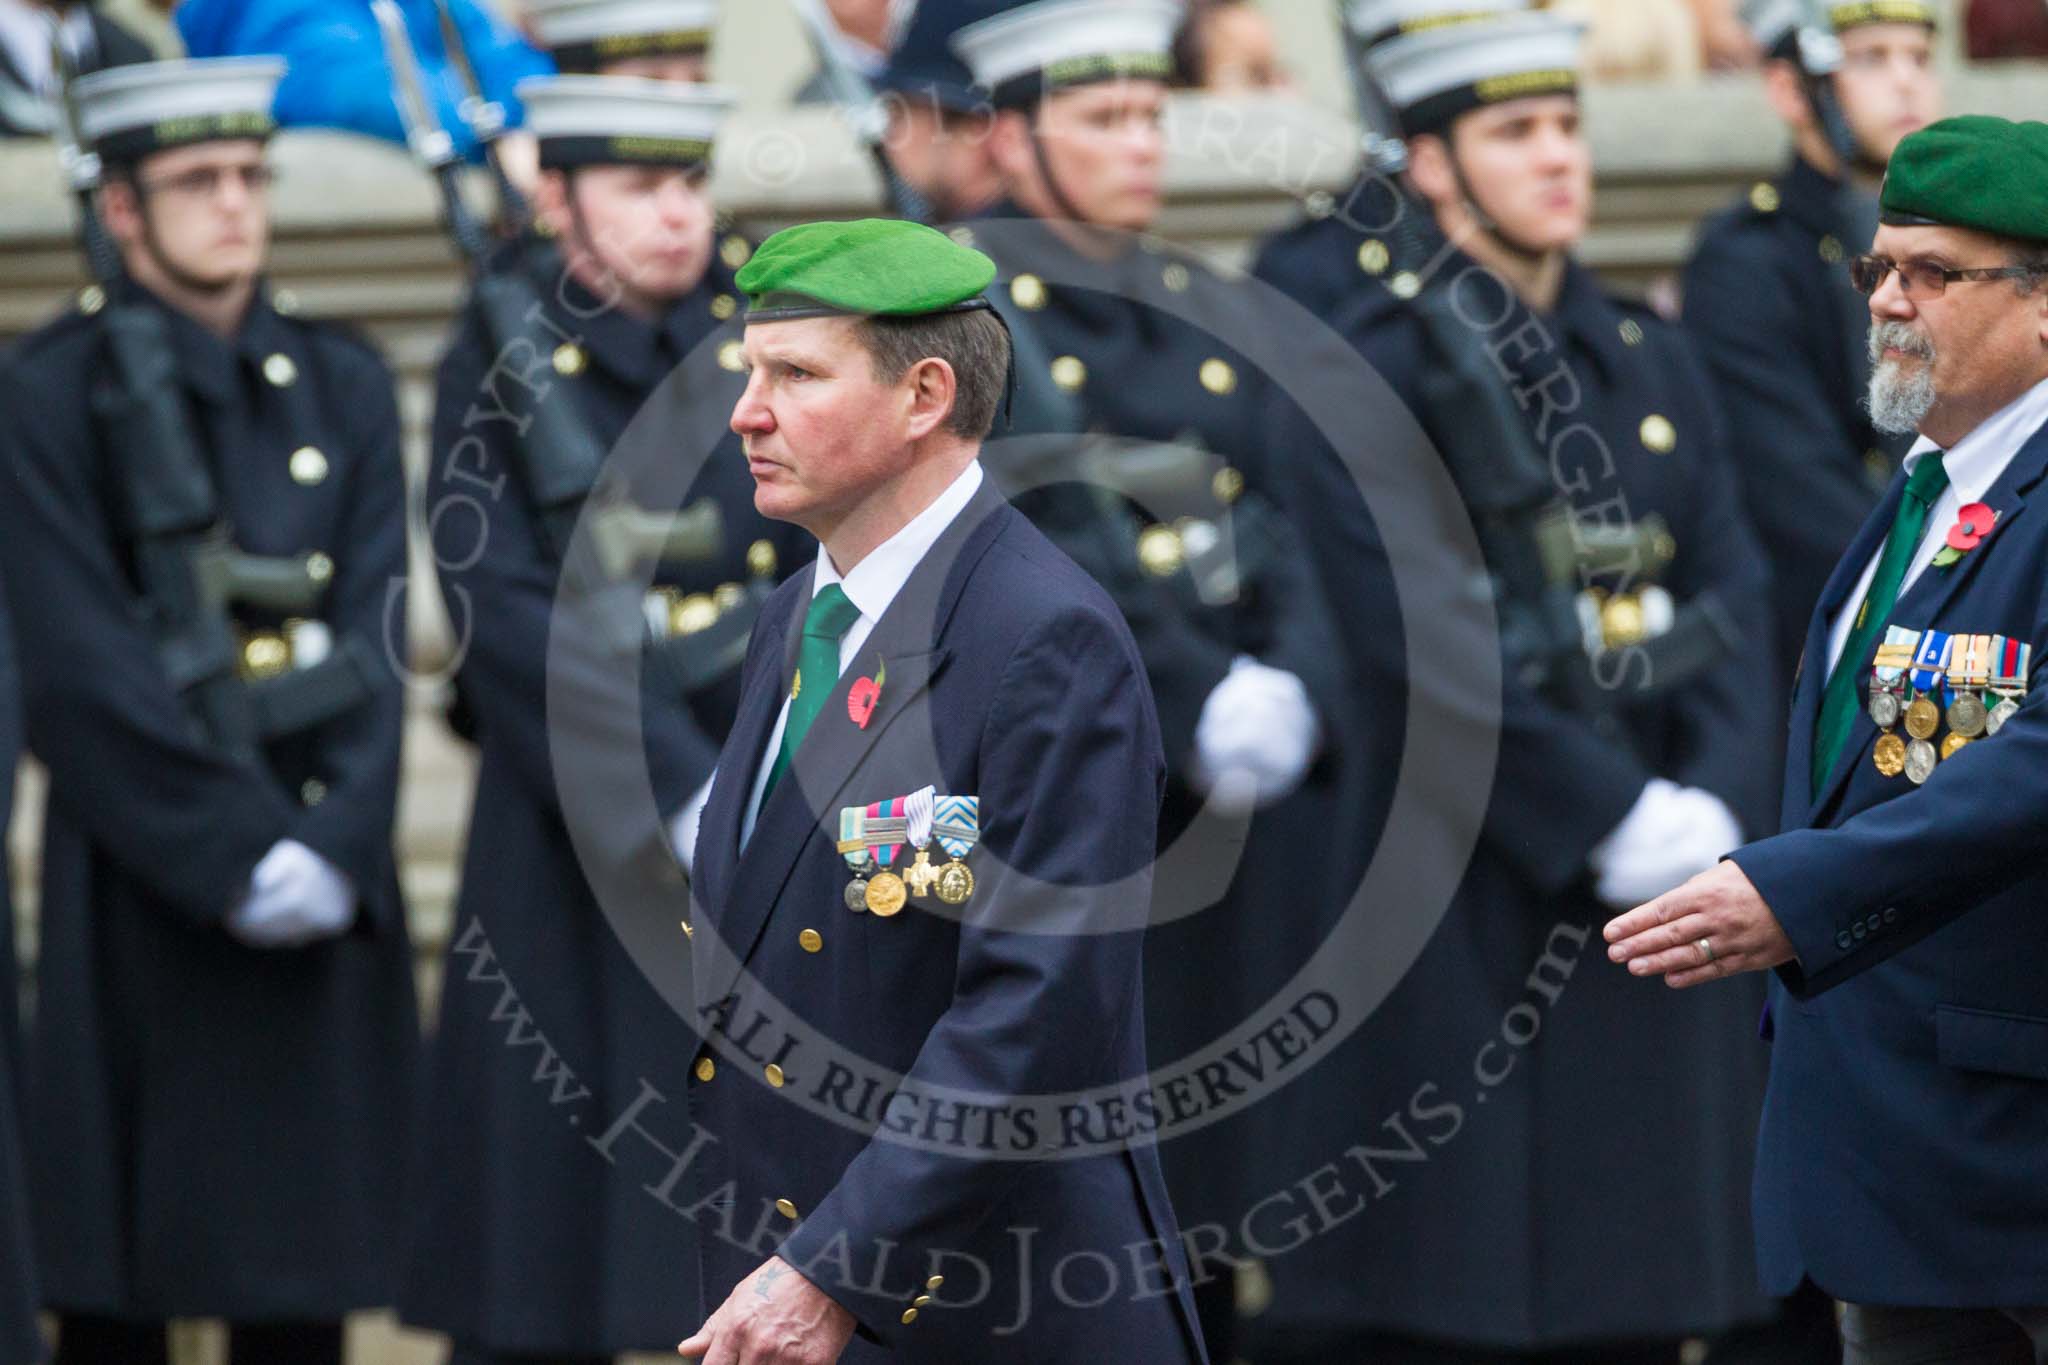 Remembrance Sunday at the Cenotaph 2015: Group D27, Foreign Legion Association.
Cenotaph, Whitehall, London SW1,
London,
Greater London,
United Kingdom,
on 08 November 2015 at 11:56, image #738